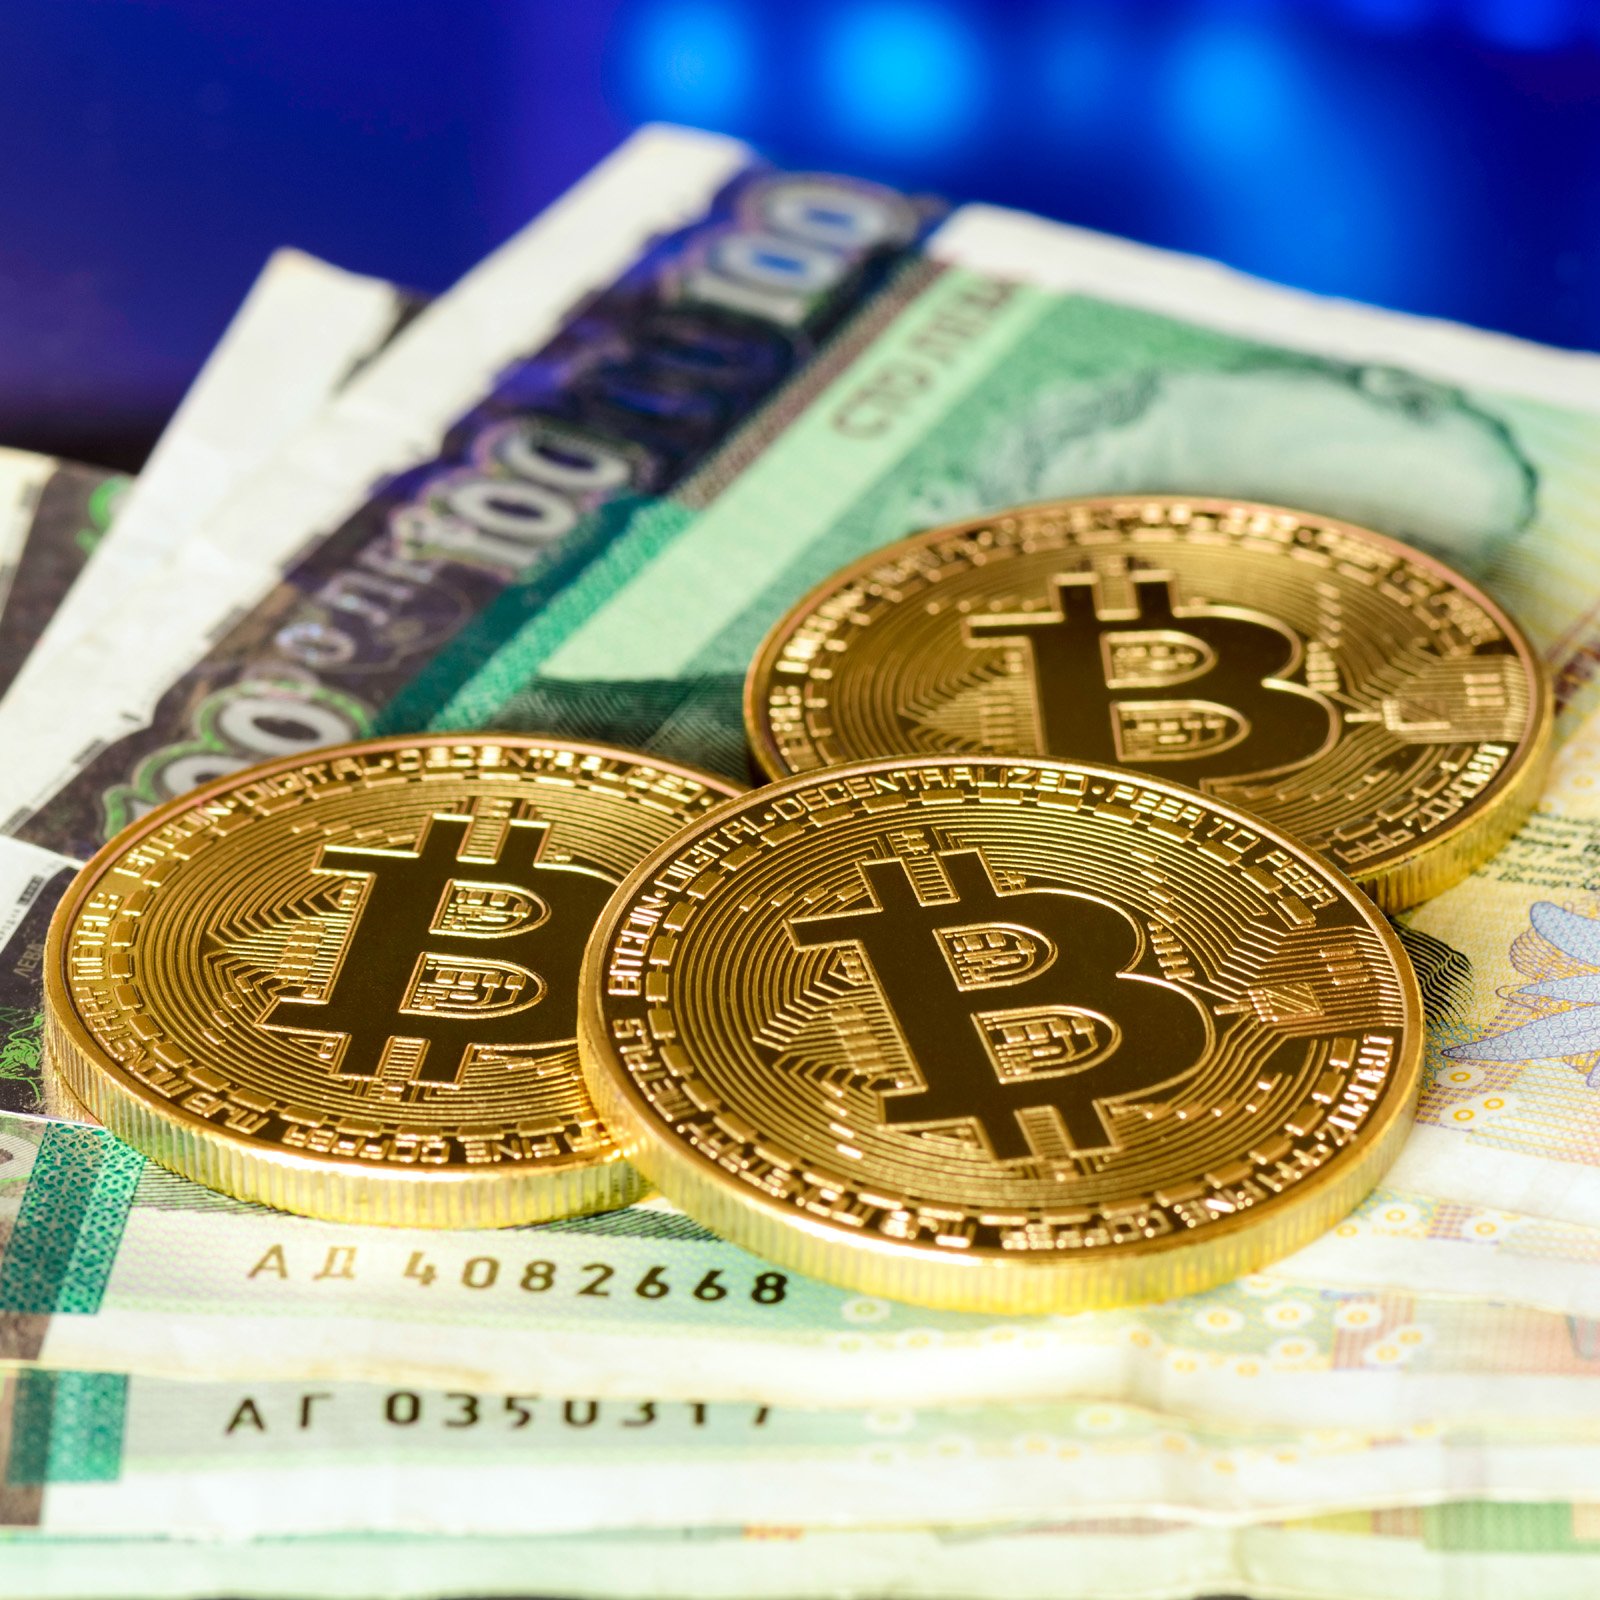 Bulgarian Tax Authority to Check Crypto Exchanges and Traders